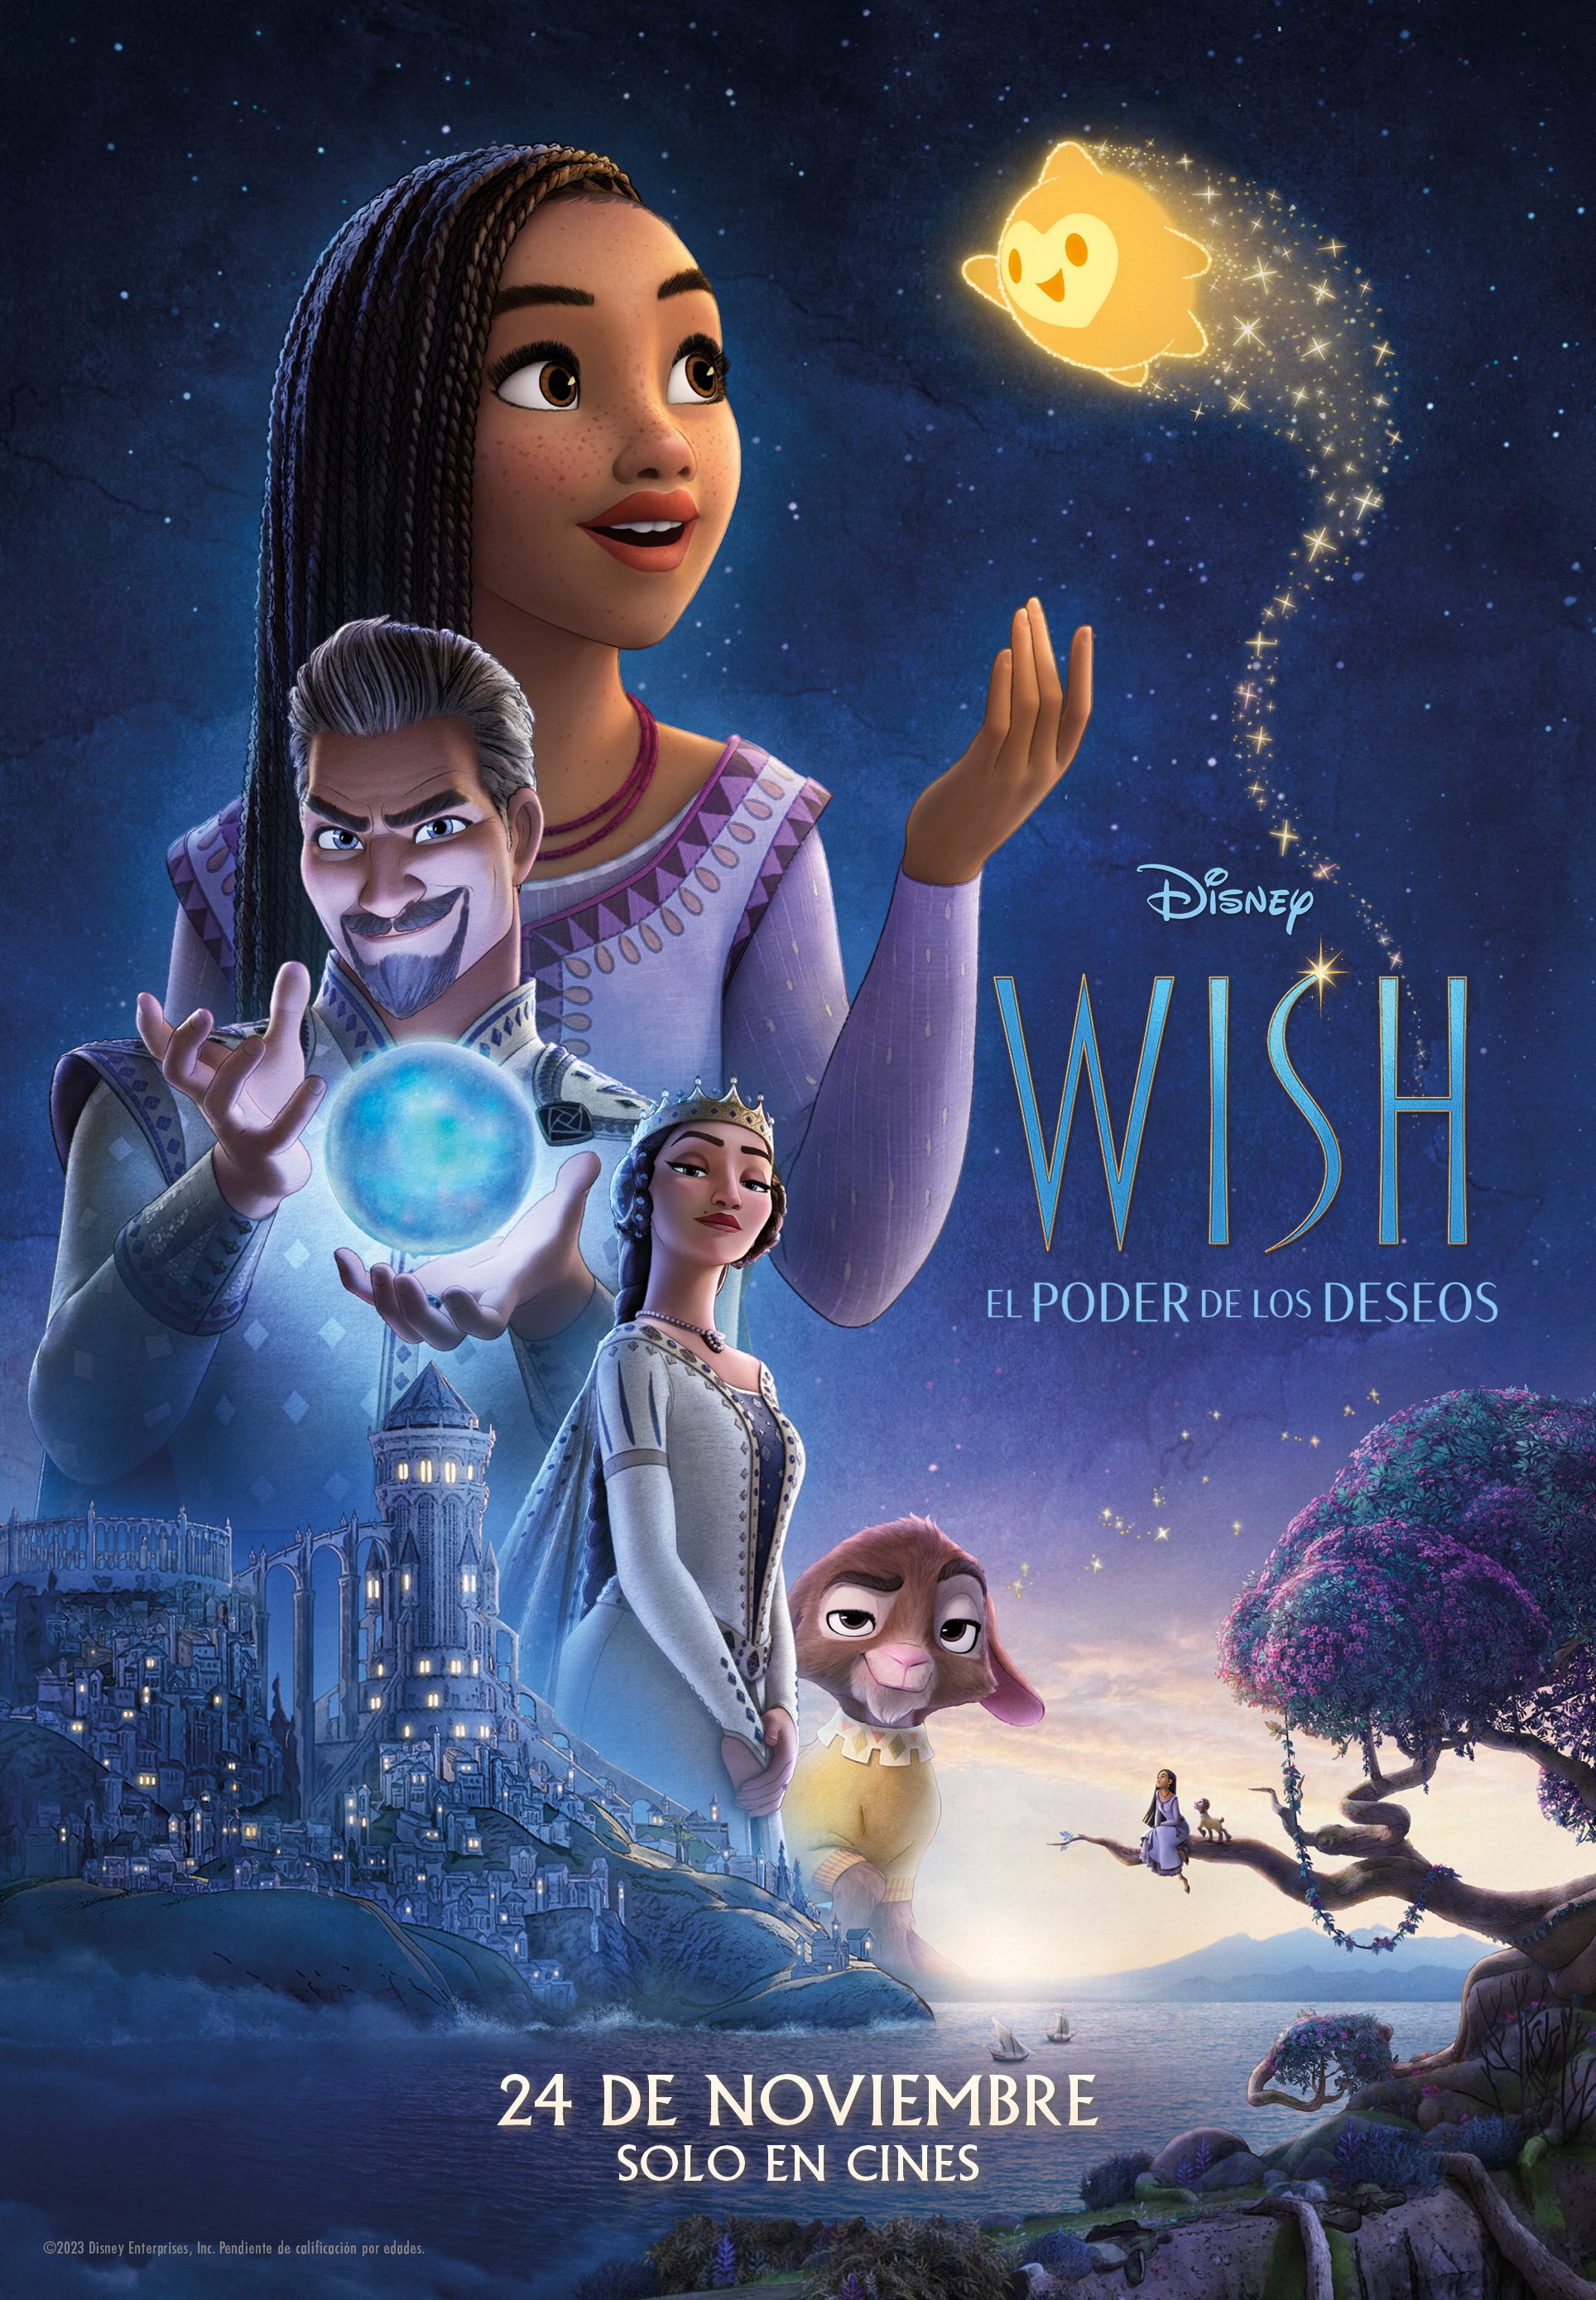 Disney Wish 2023 movie pictures collection - images, posters and official  art - YouLoveIt.com